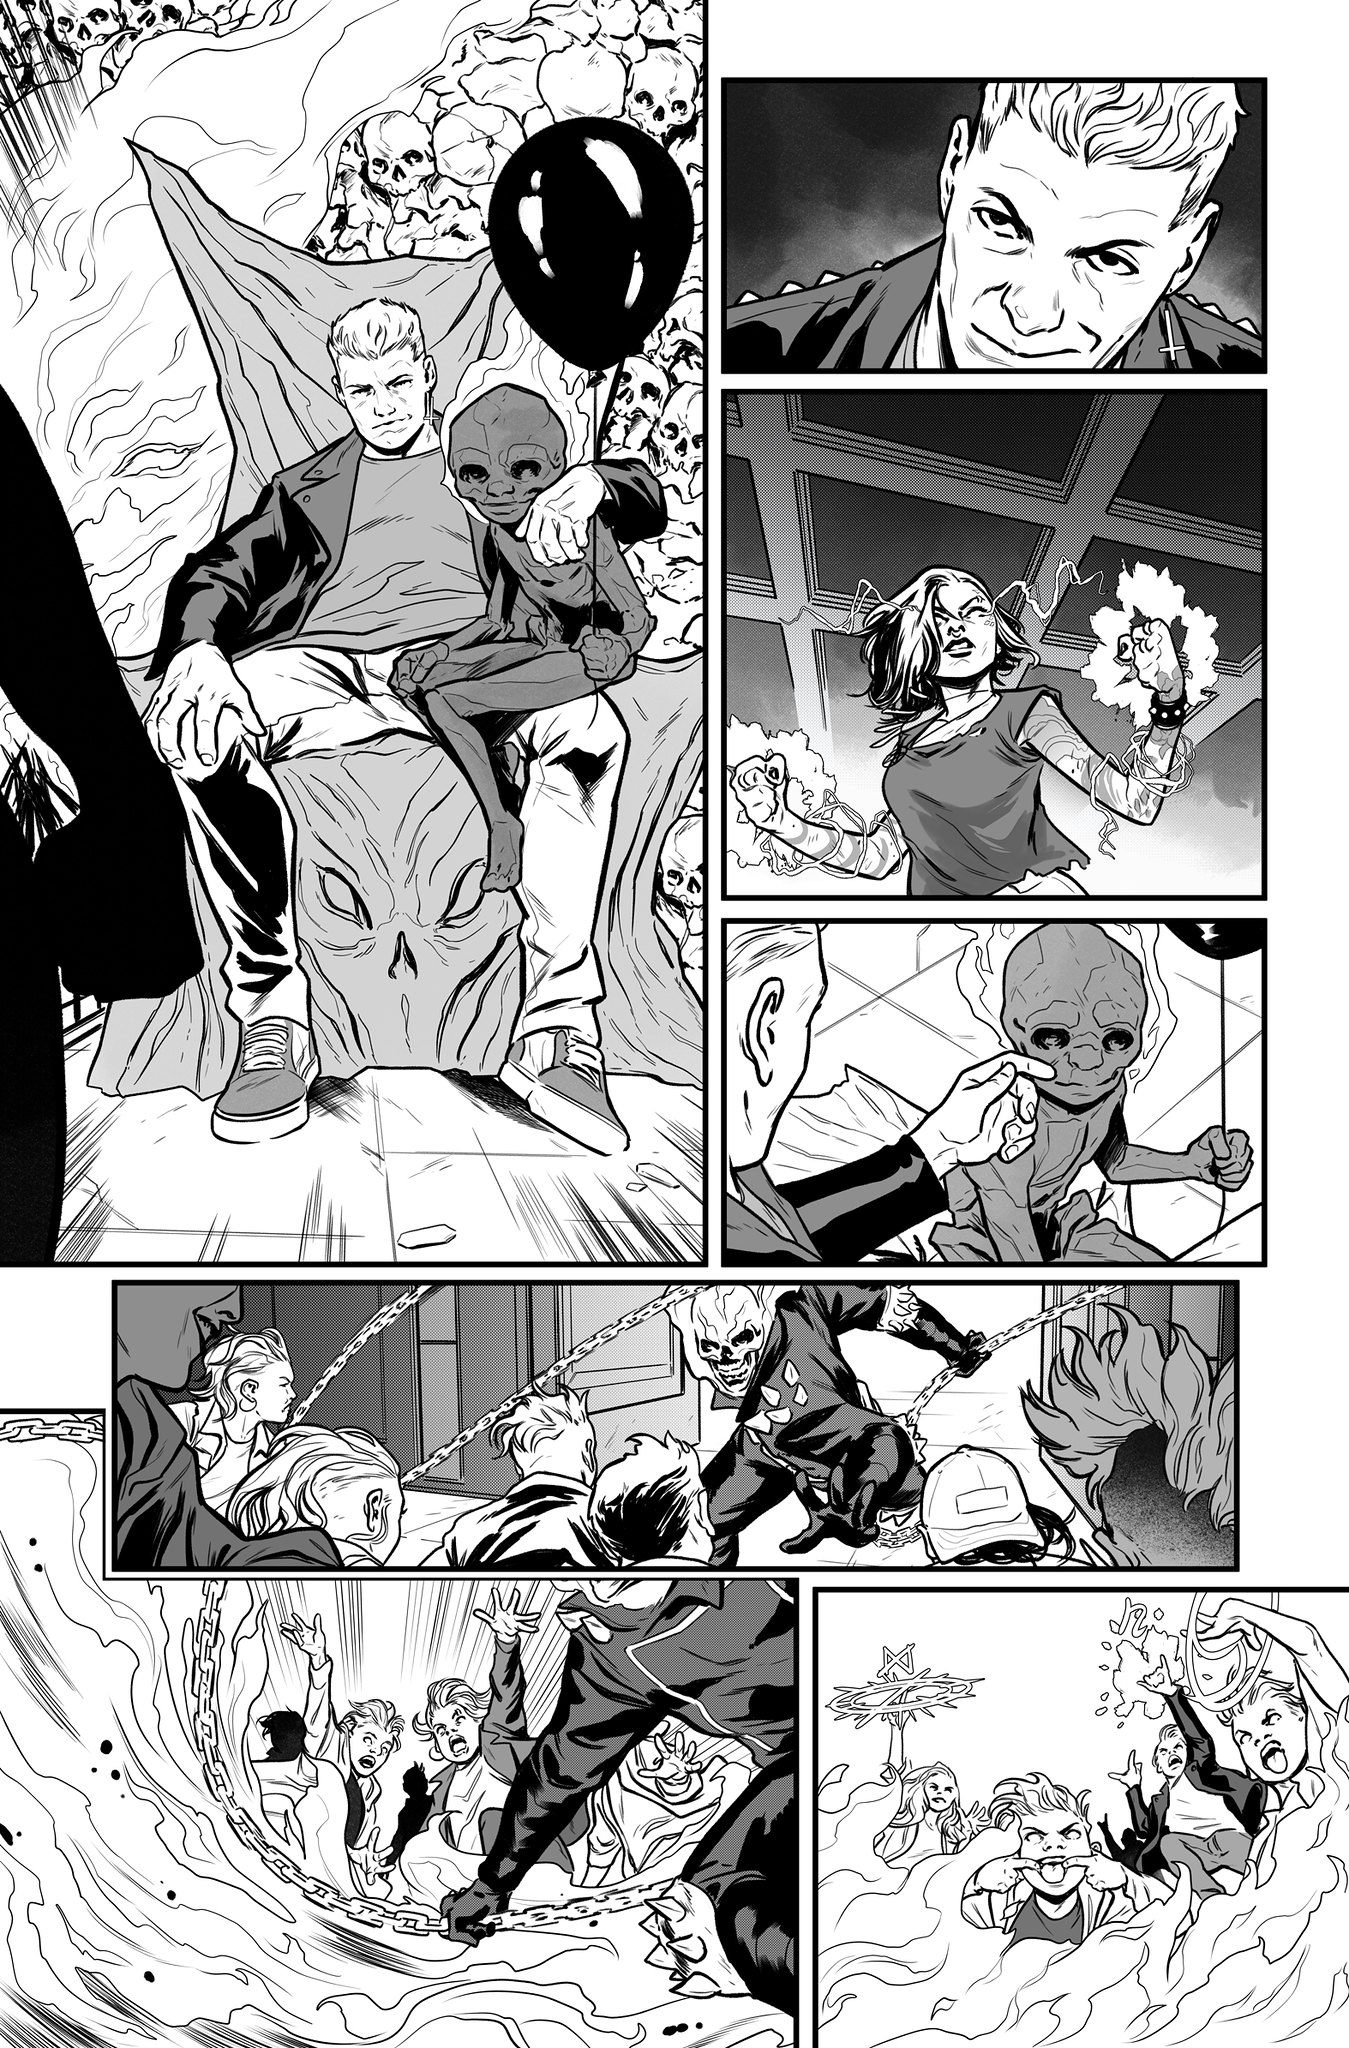 GHOSTRIDER#21_PAGE20_INKS